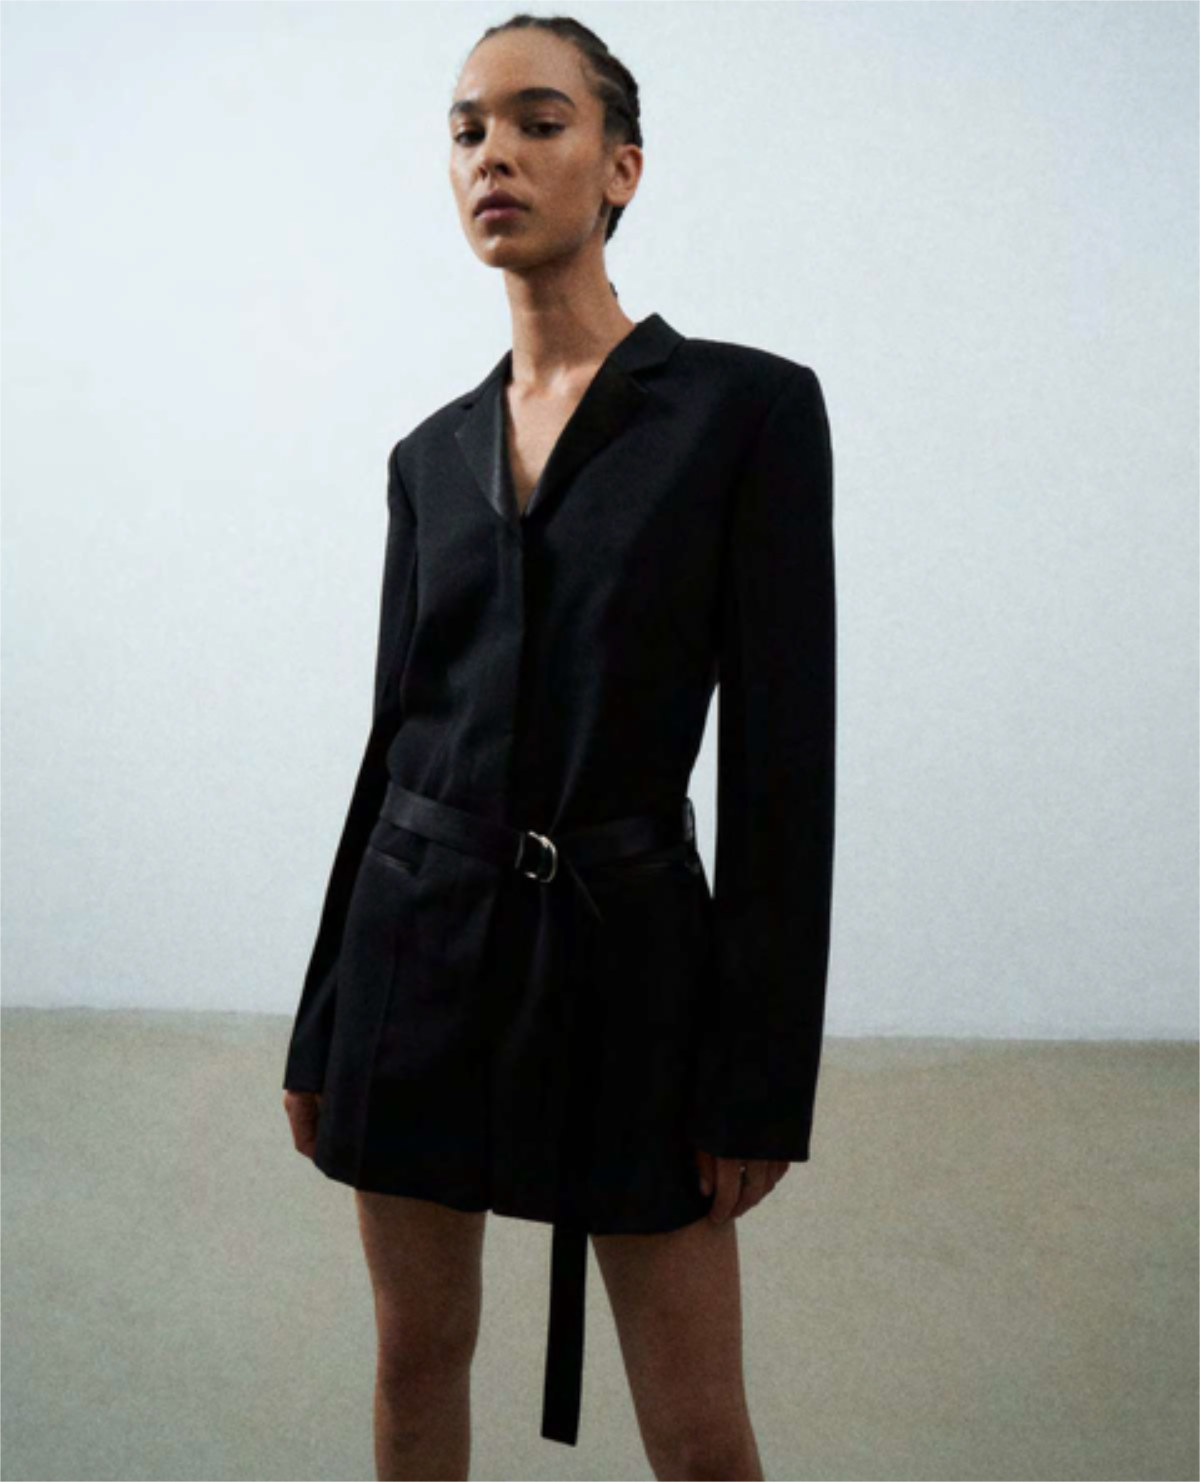 Helmut Lang Presents Its New Resort 2022 Women's Collection